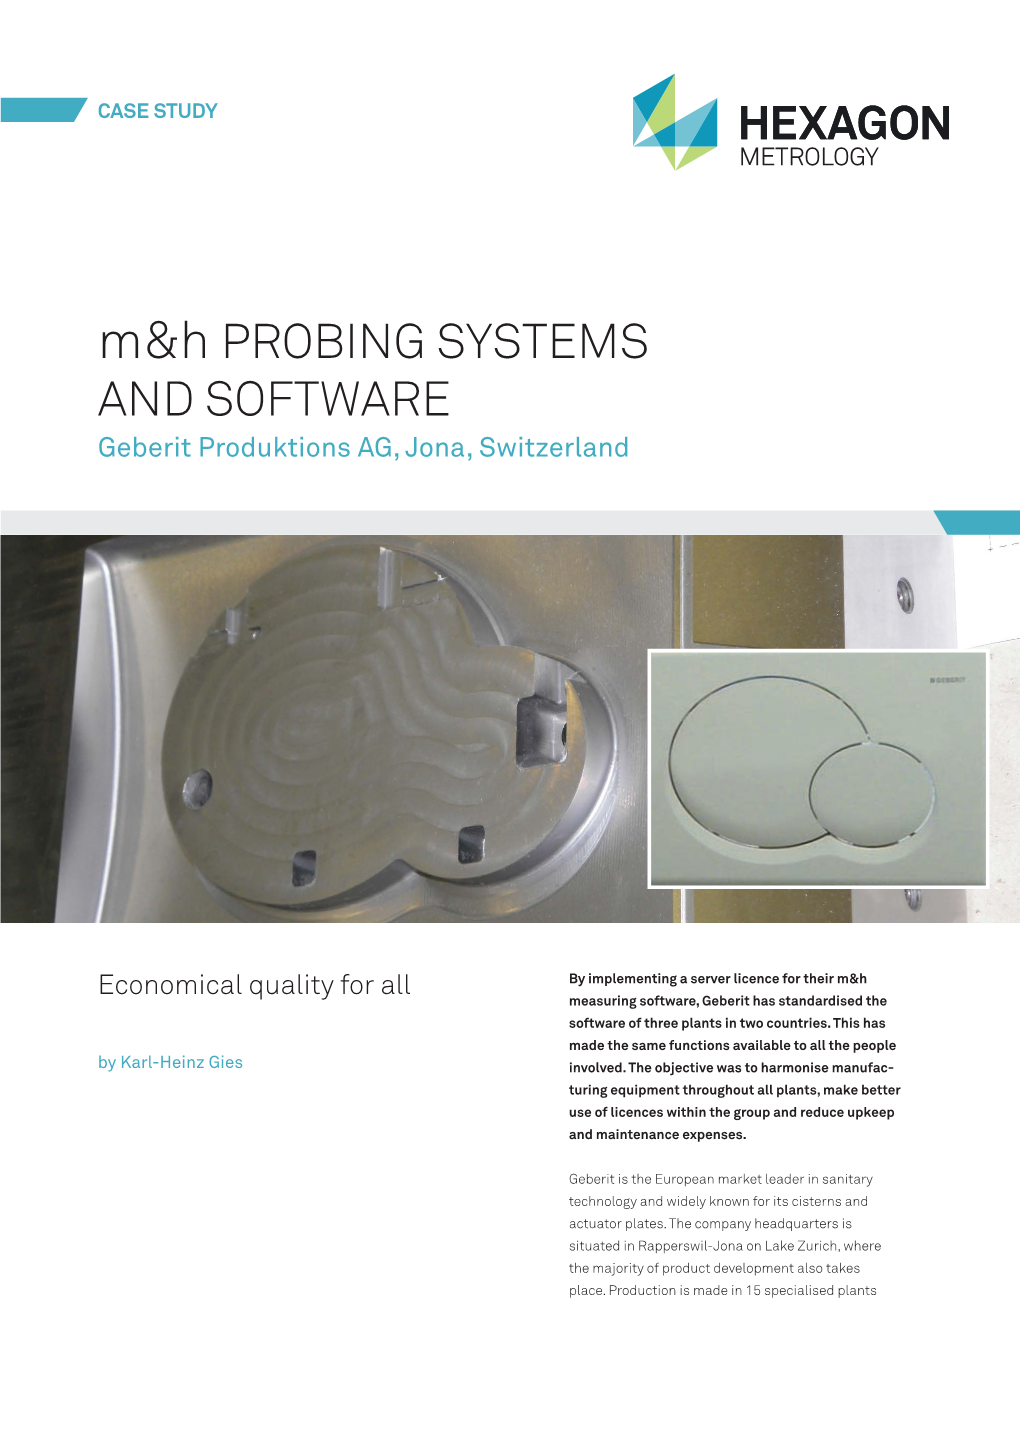 M&H PROBING SYSTEMS and SOFTWARE